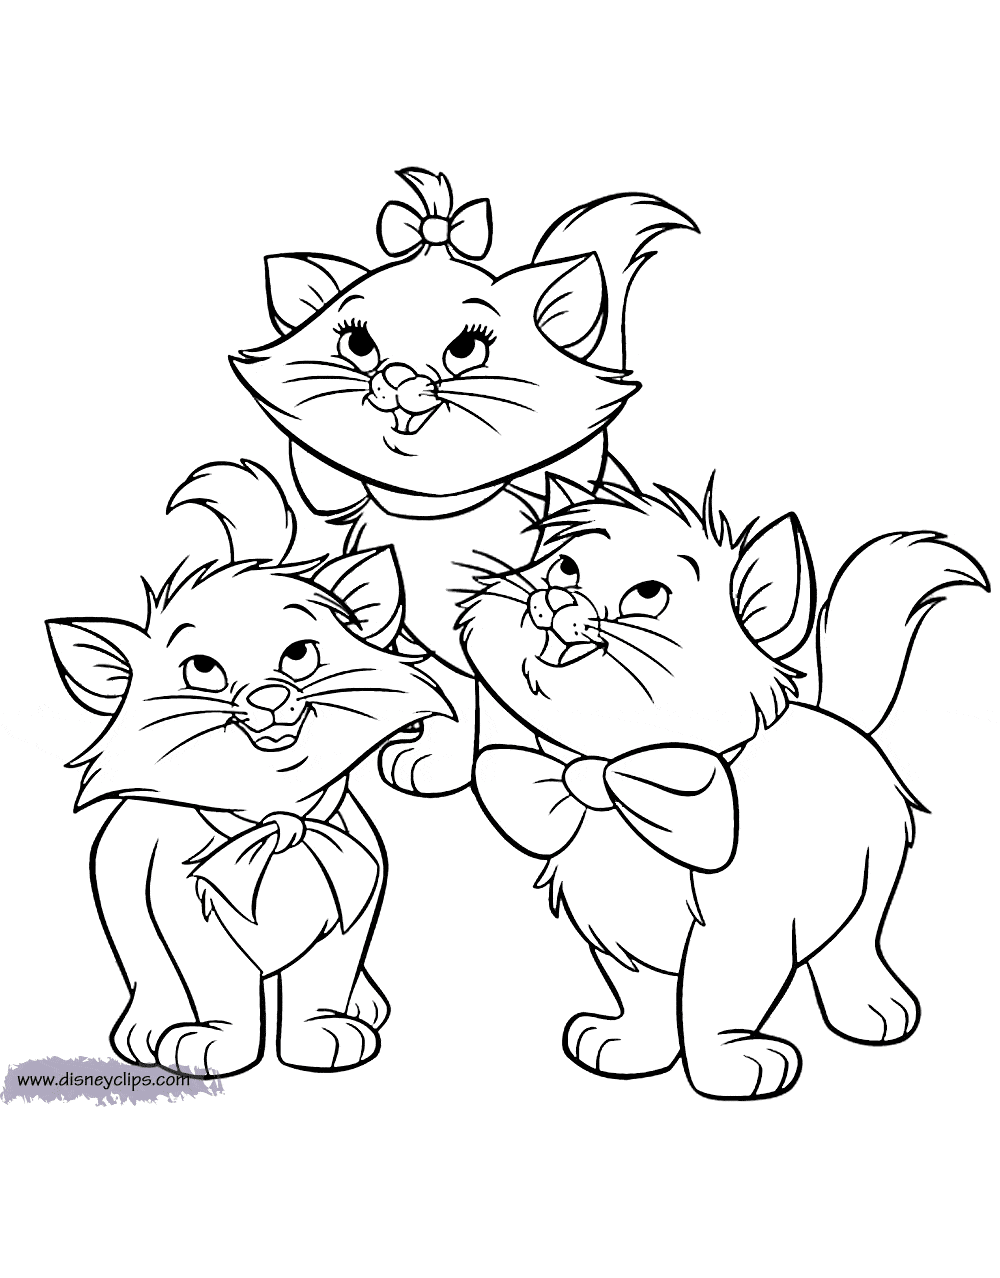 Aristocats Coloring Pages Disney Coloring Sheets Disney Coloring Pages Cat Coloring Page